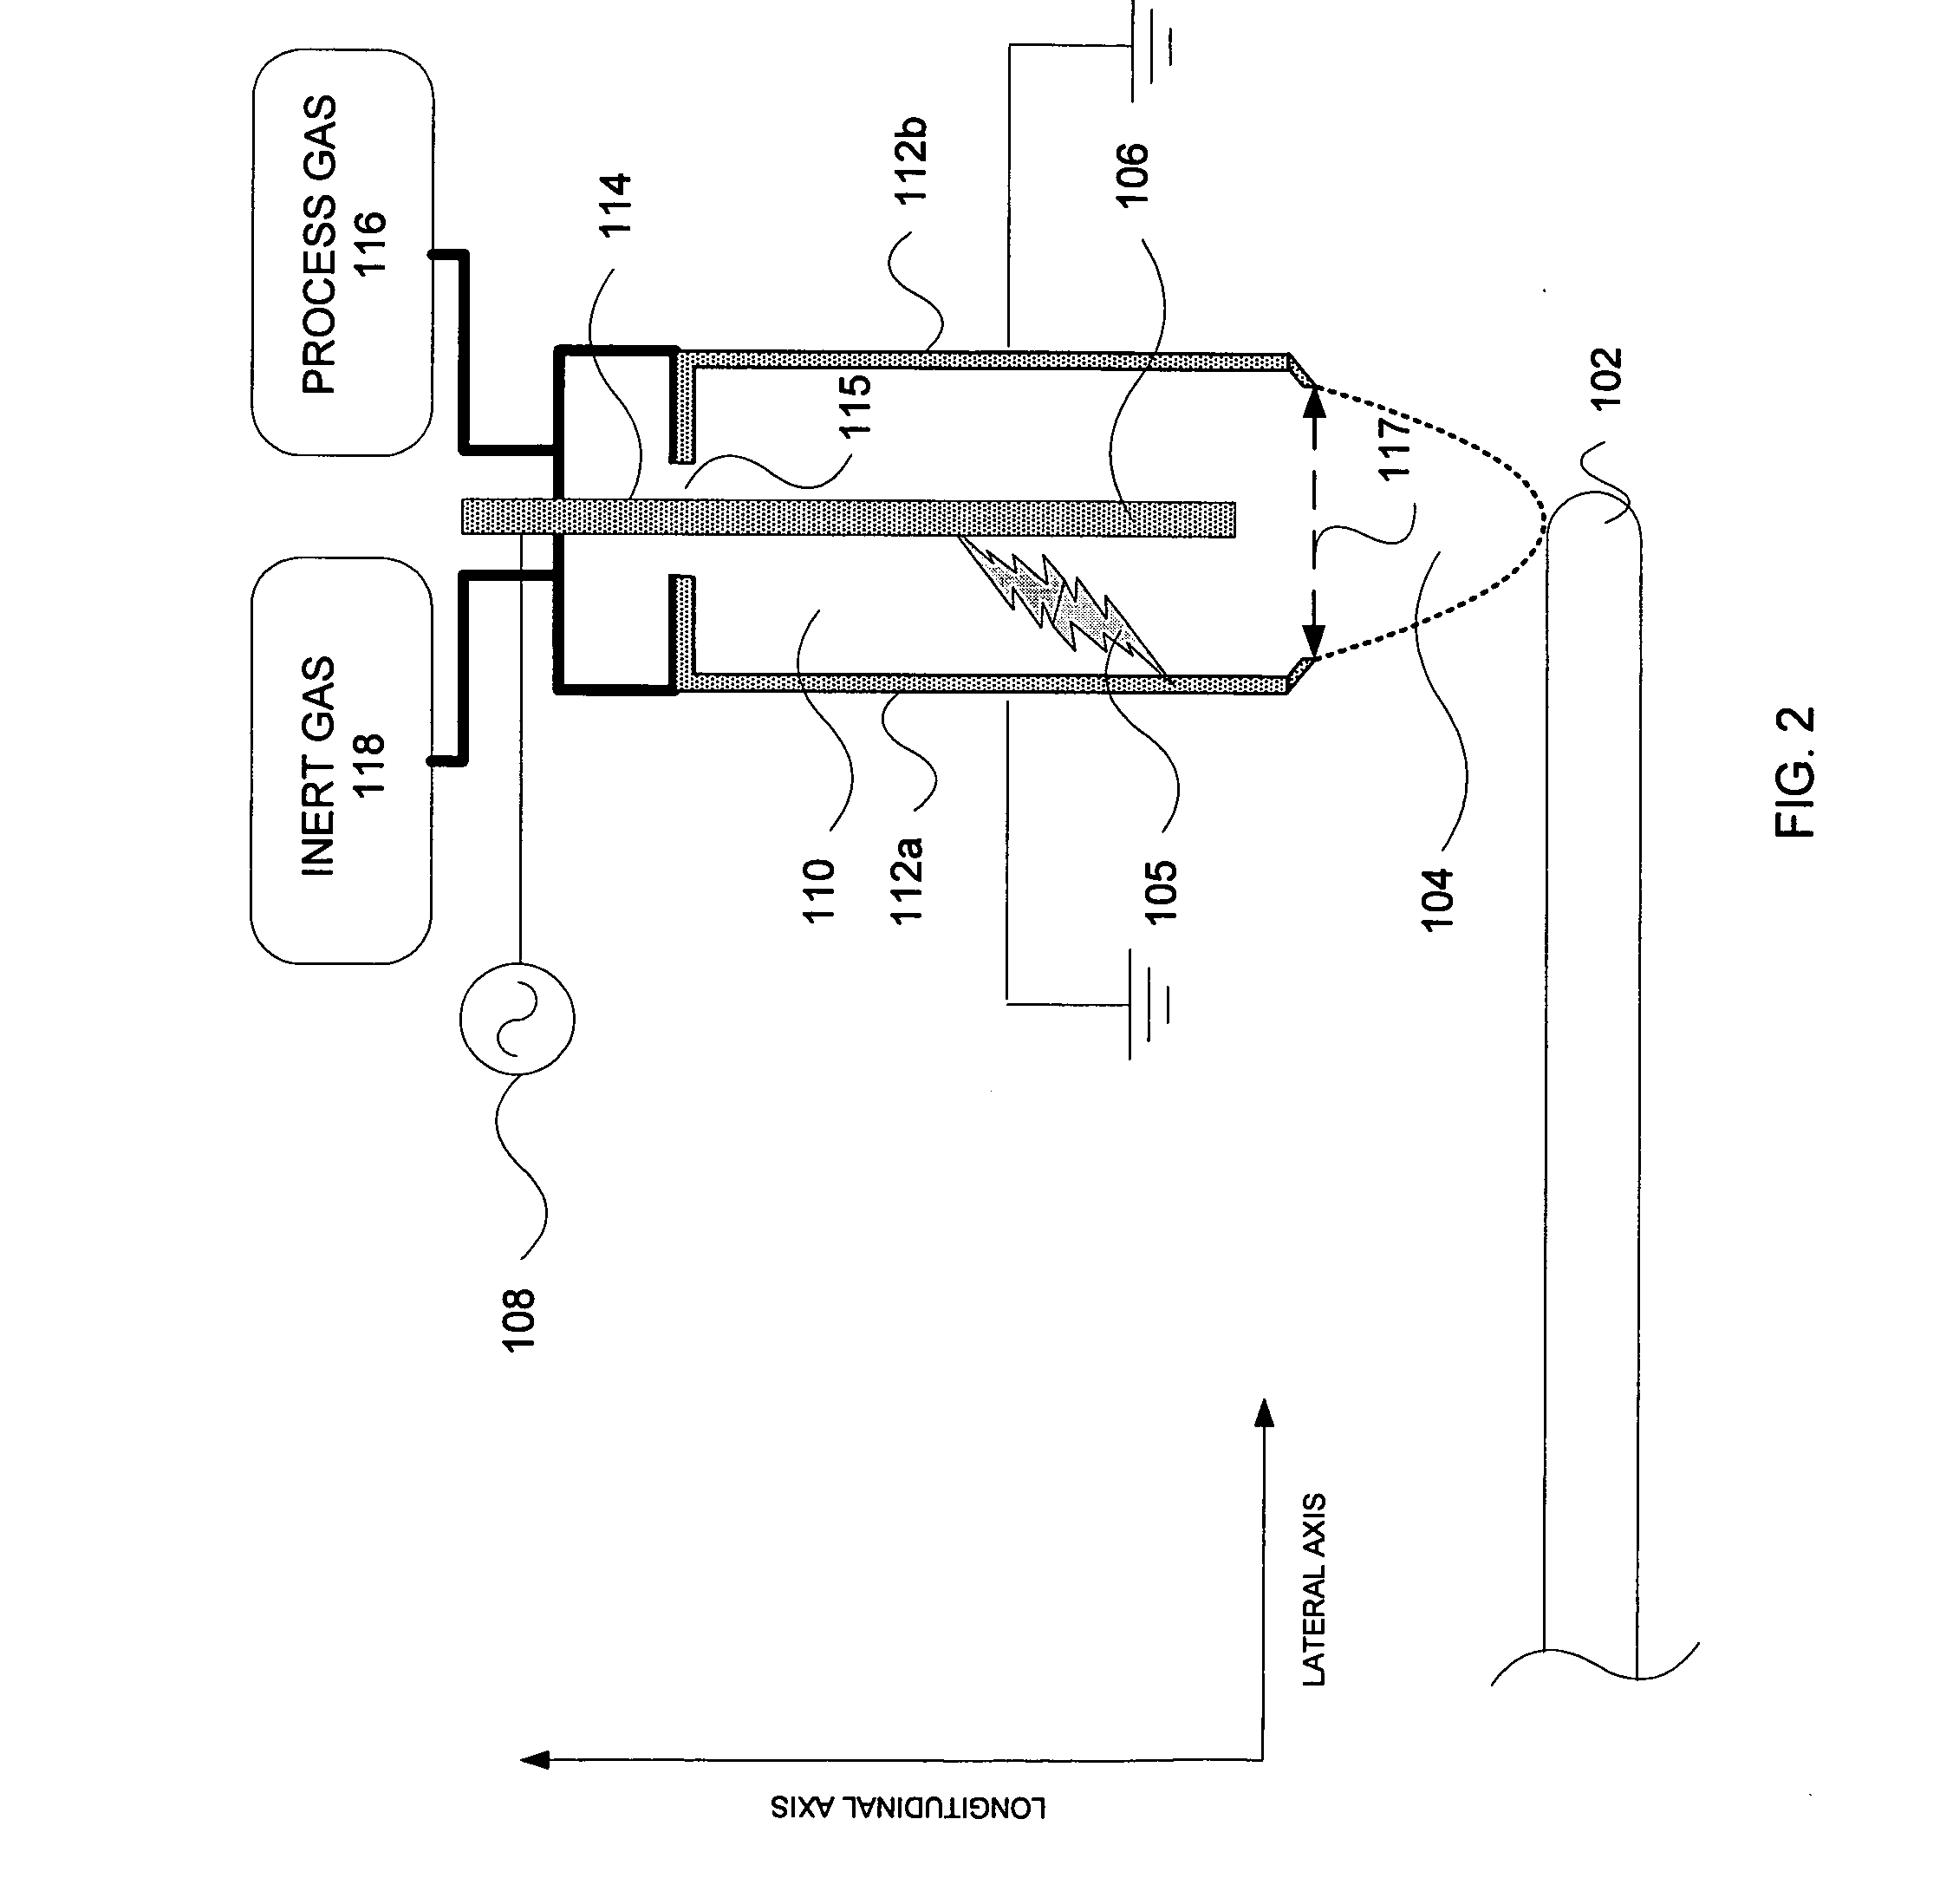 Apparatus for the removal of a fluorinated polymer from a substrate and methods therefor